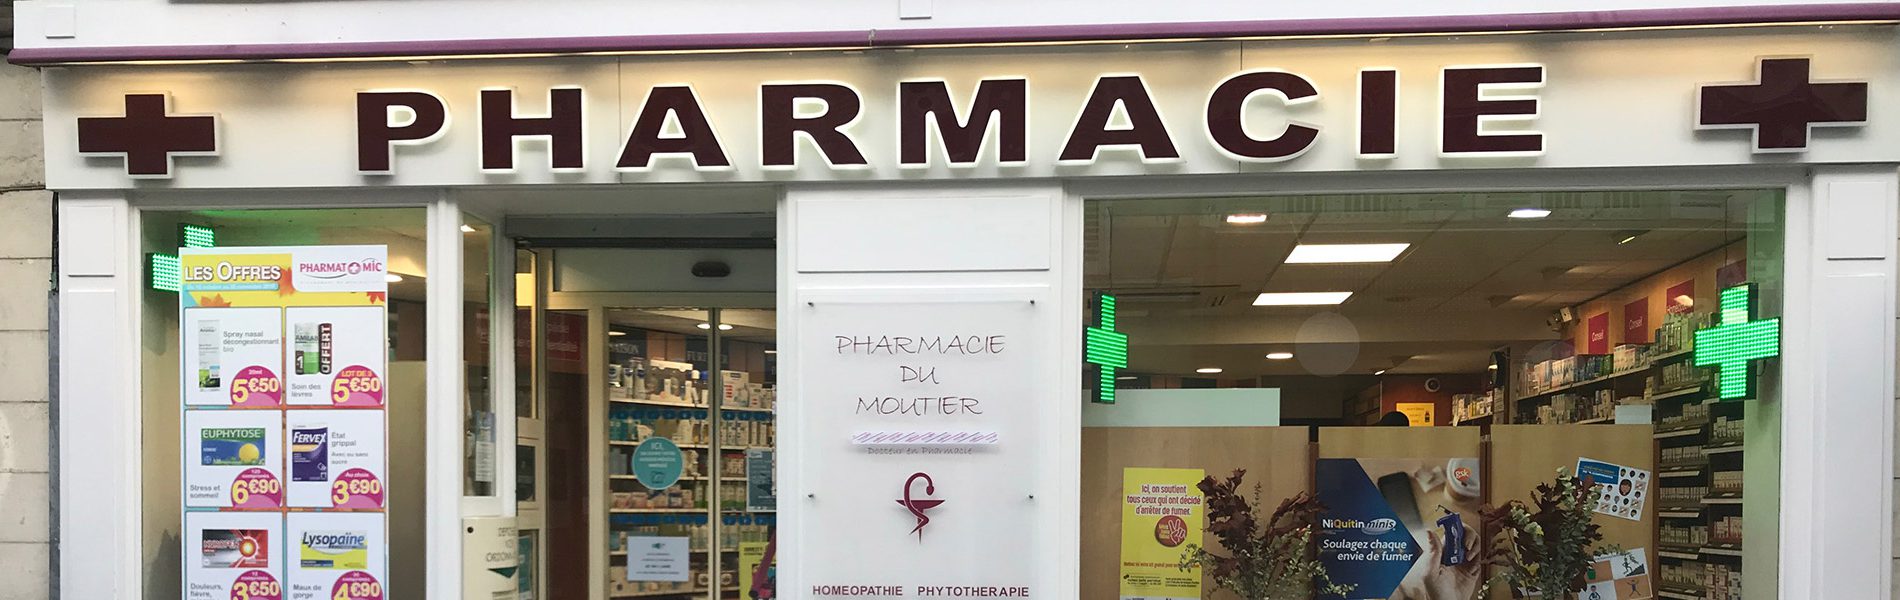 Pharmacie DU MOUTIER - Image Homepage 1